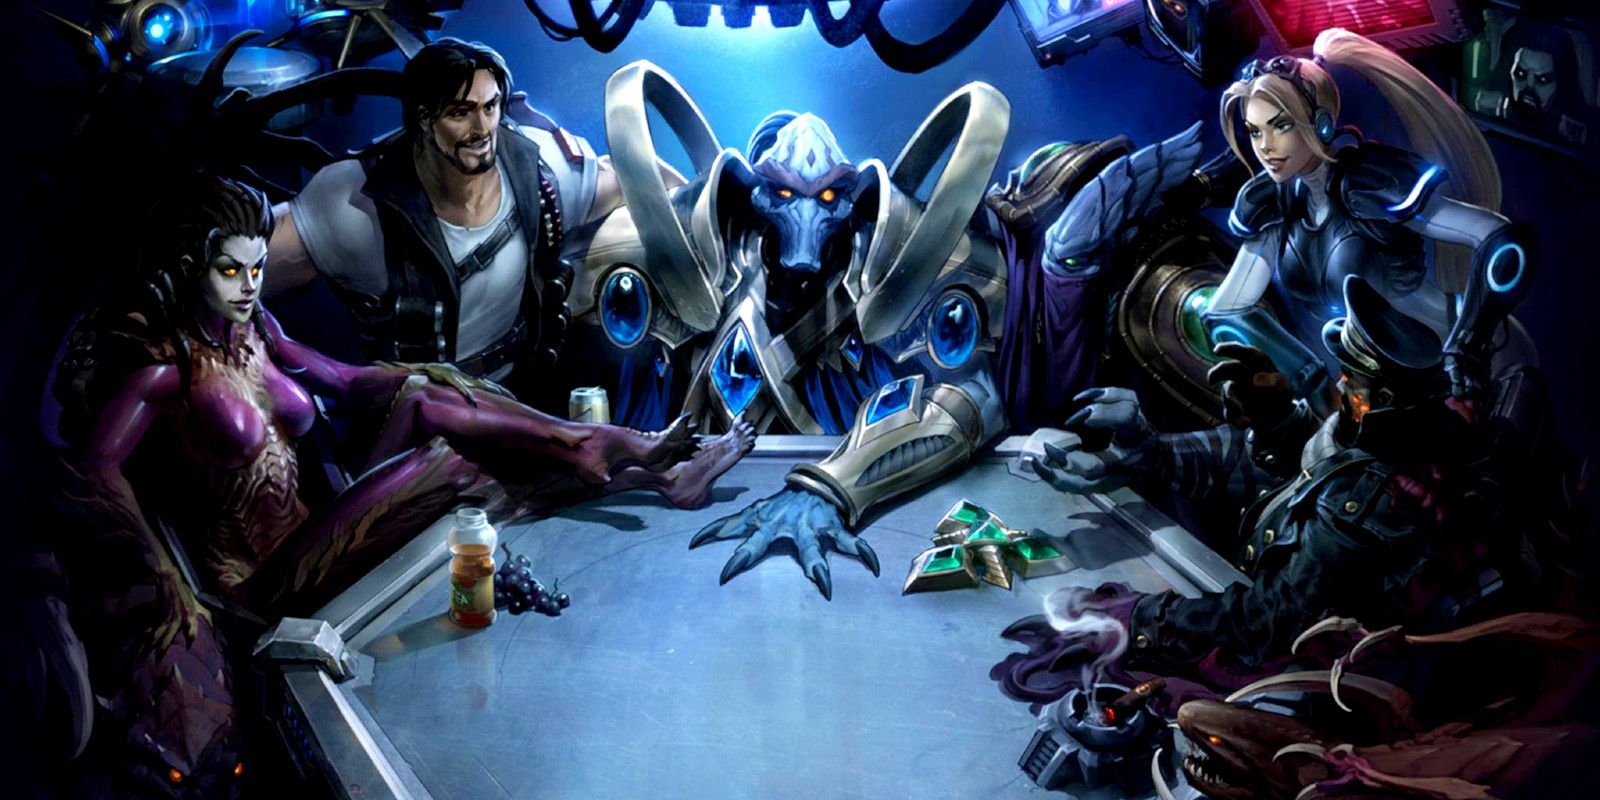 StarCraft 2 characters